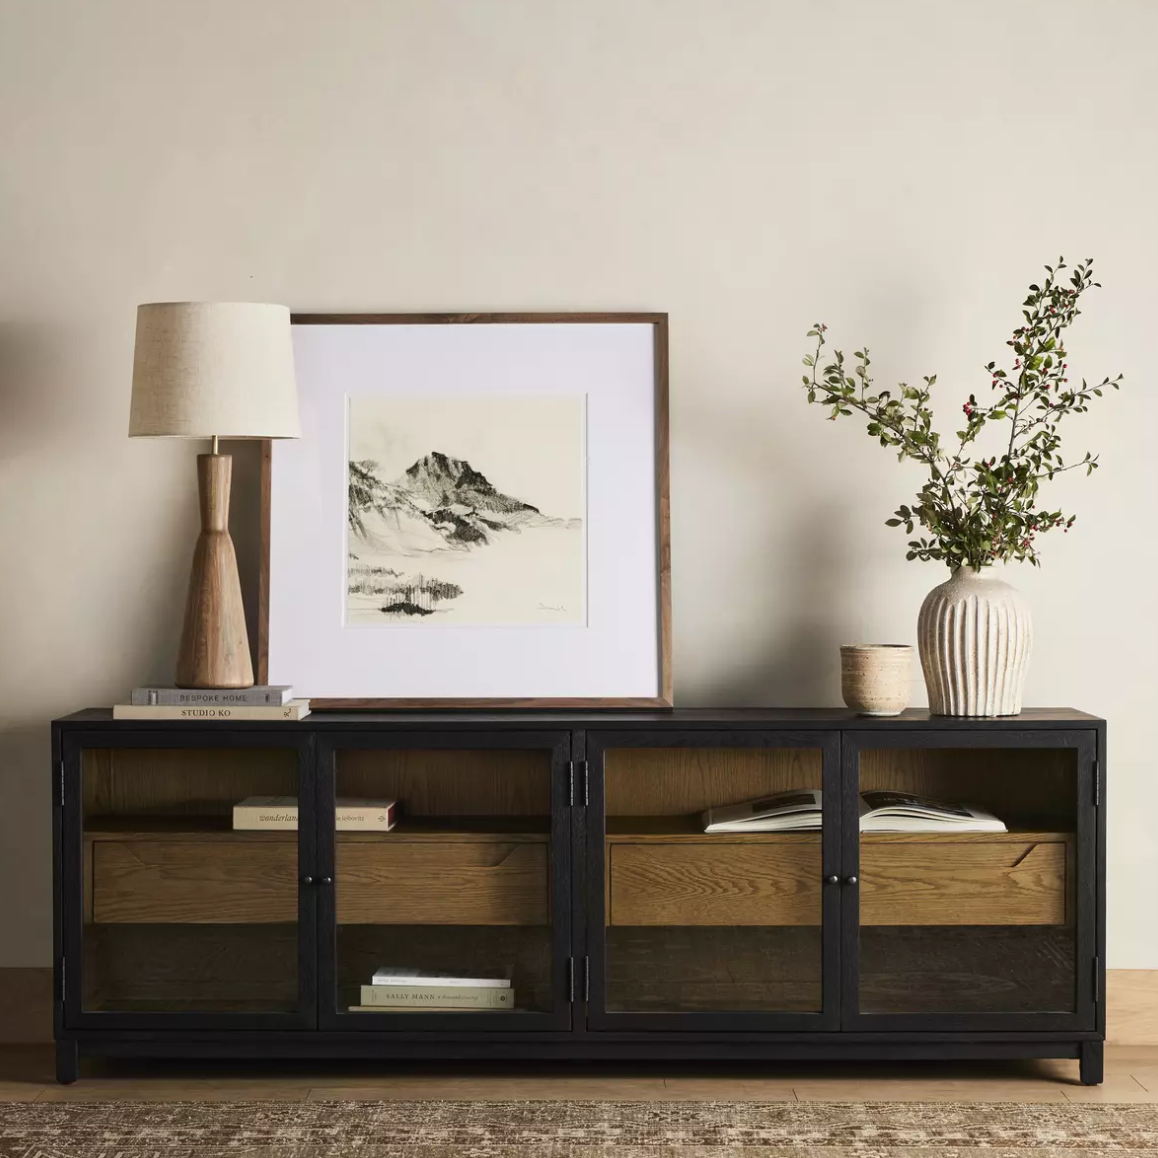 Millie Media Console